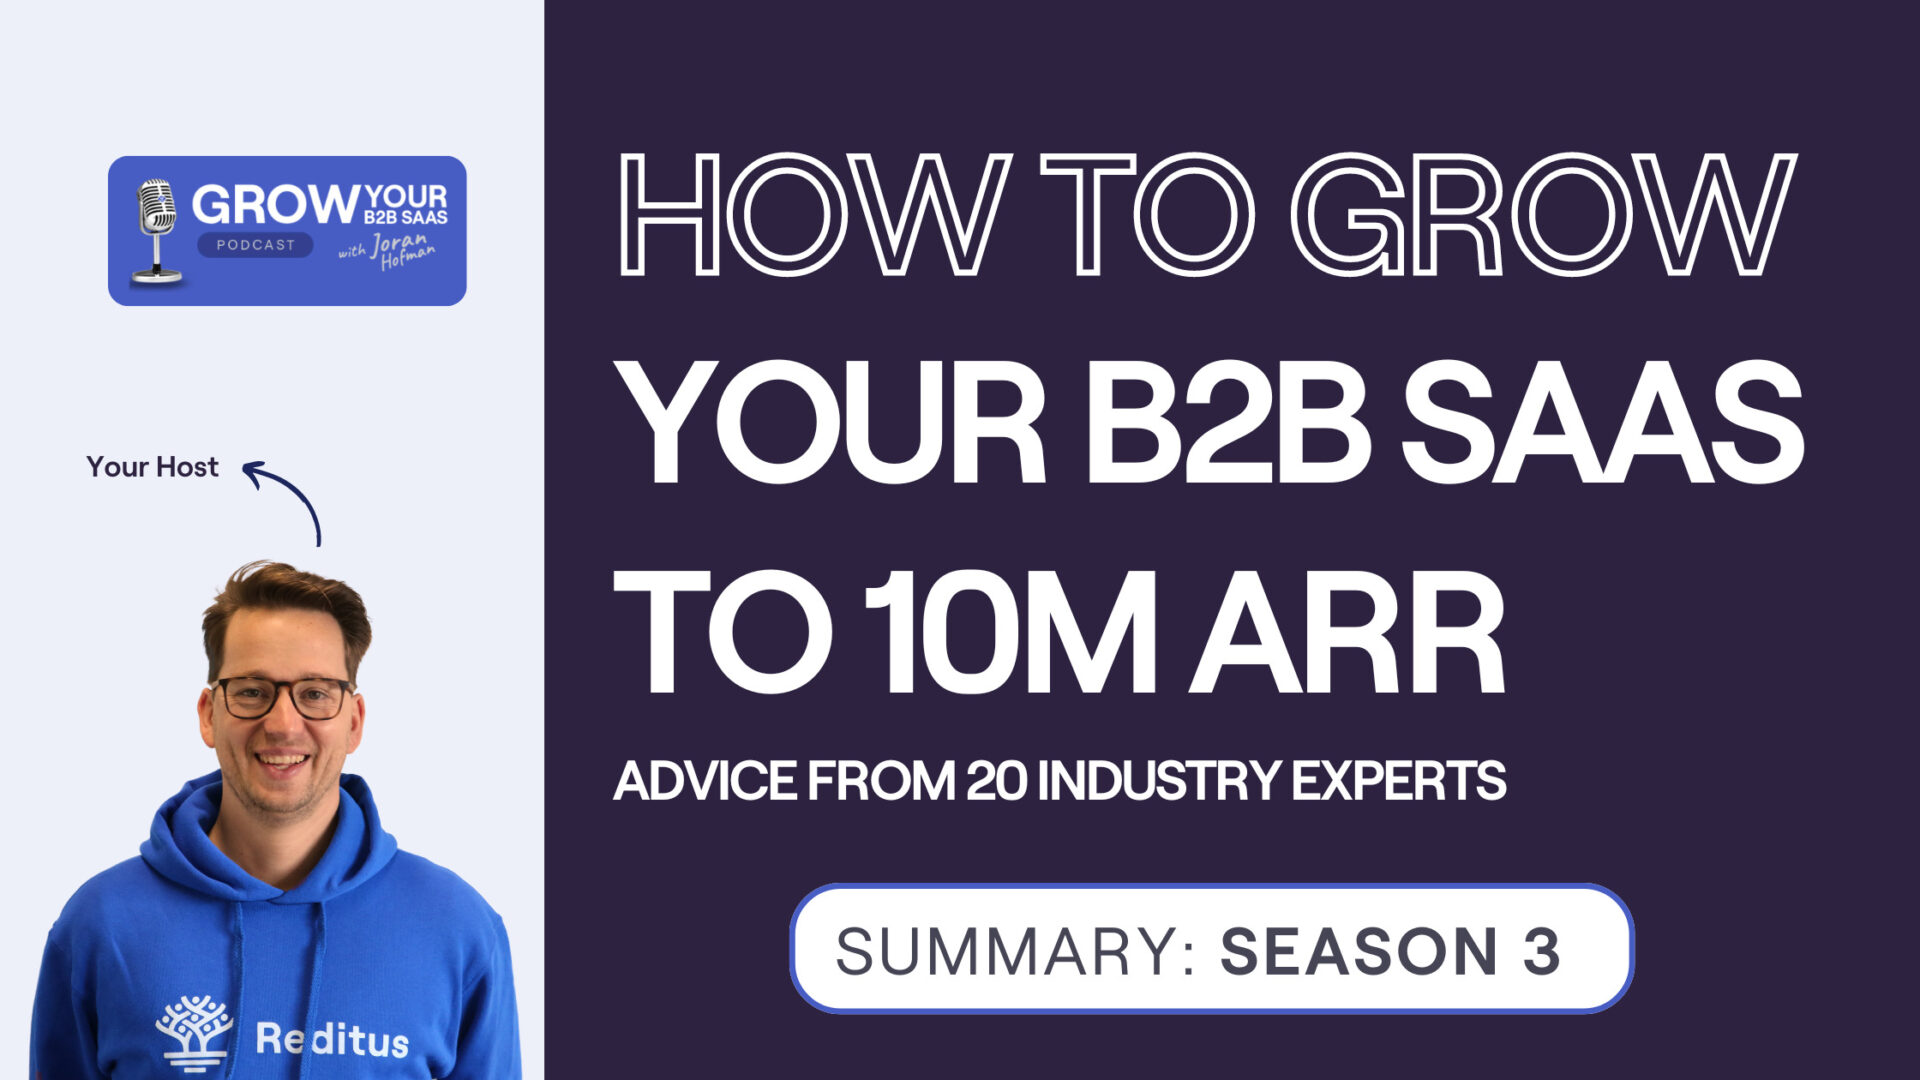 S3E22 - How to grow your B2B SaaS to 10M ARR? Advice from 20 experts